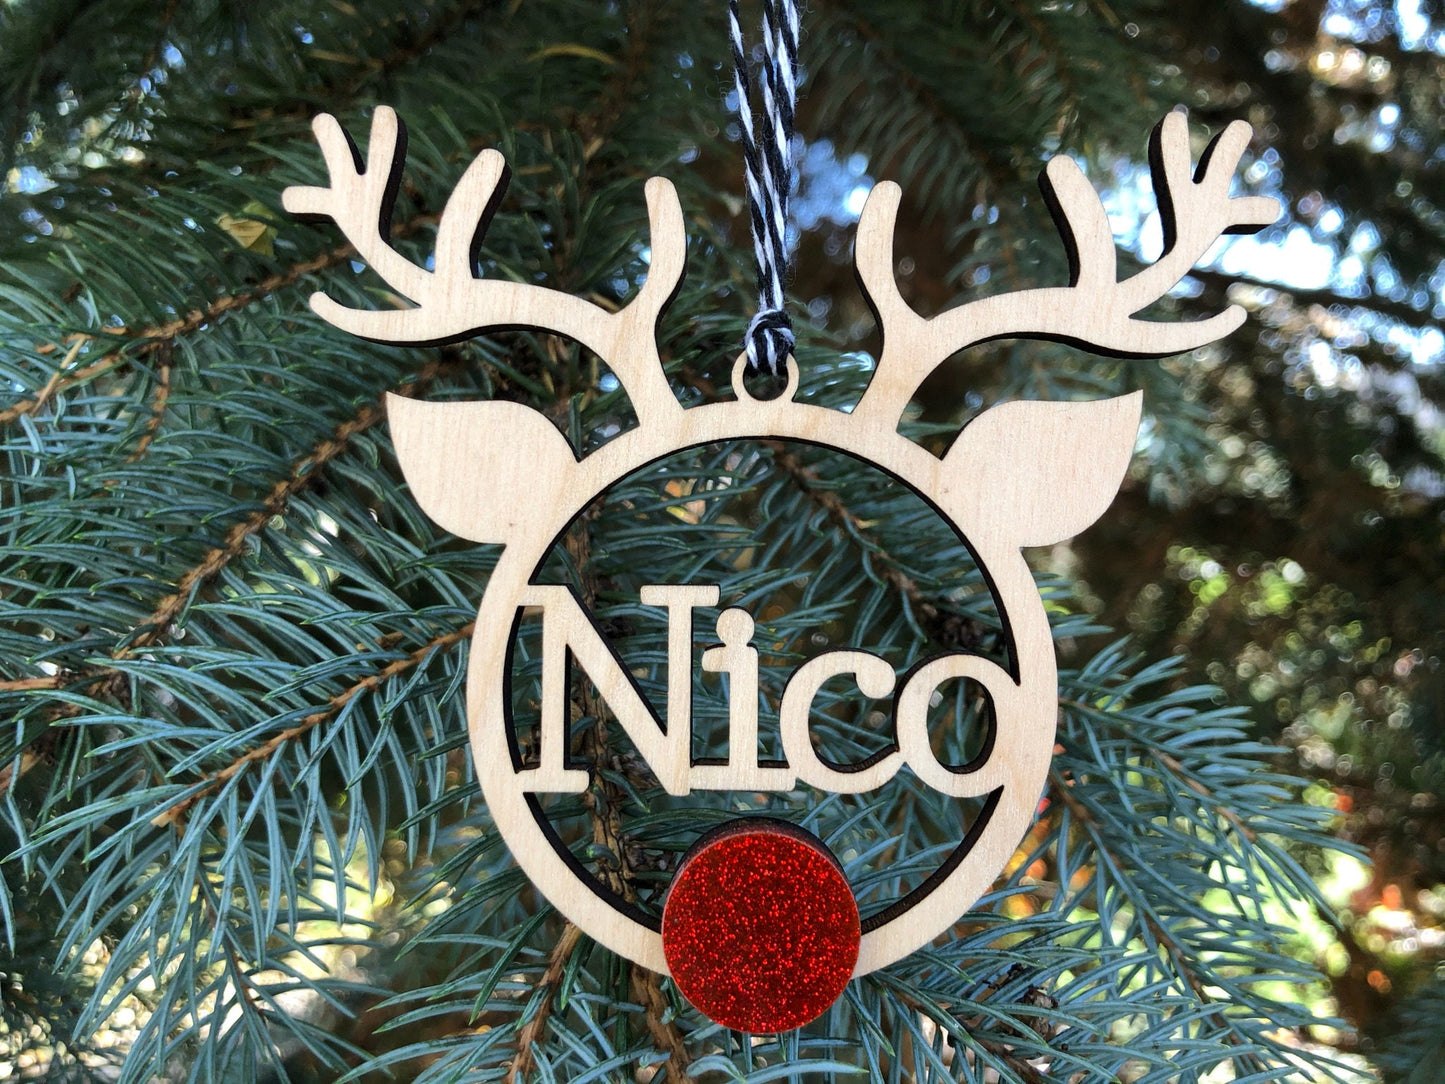 Reindeer Ornament, Personalized with Name